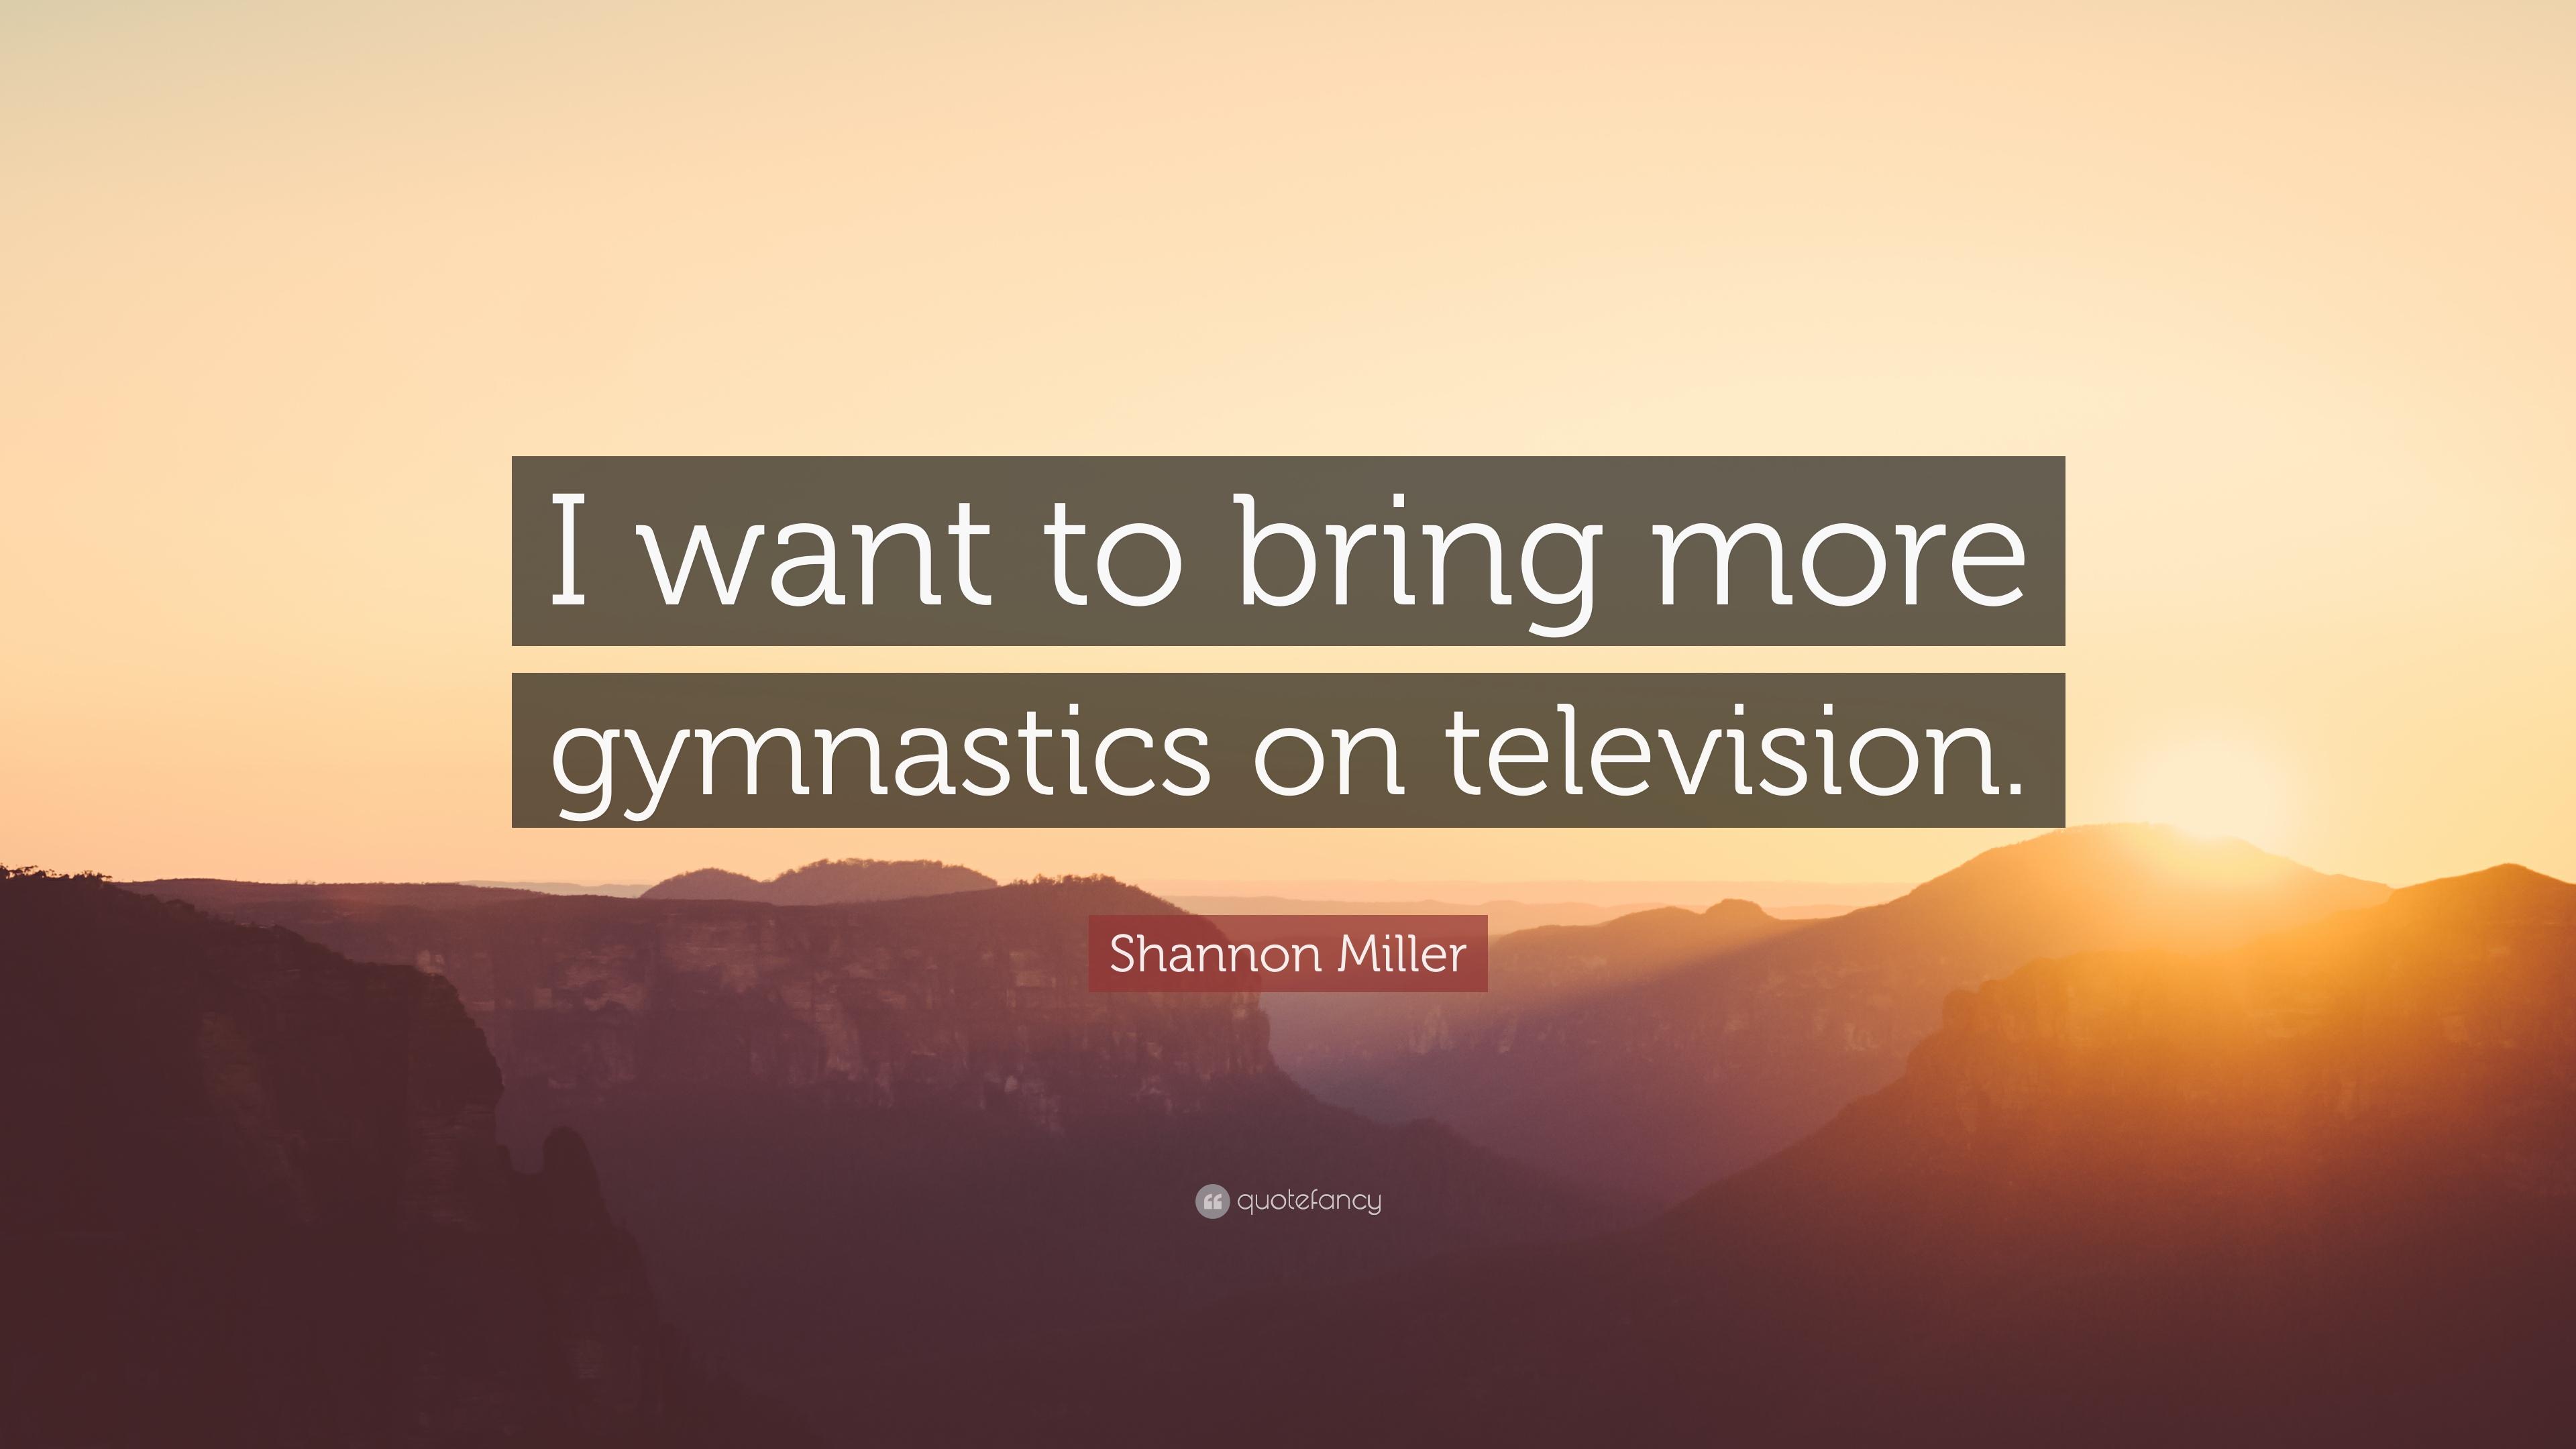 Shannon Miller Quote: “I want to bring more gymnastics on television